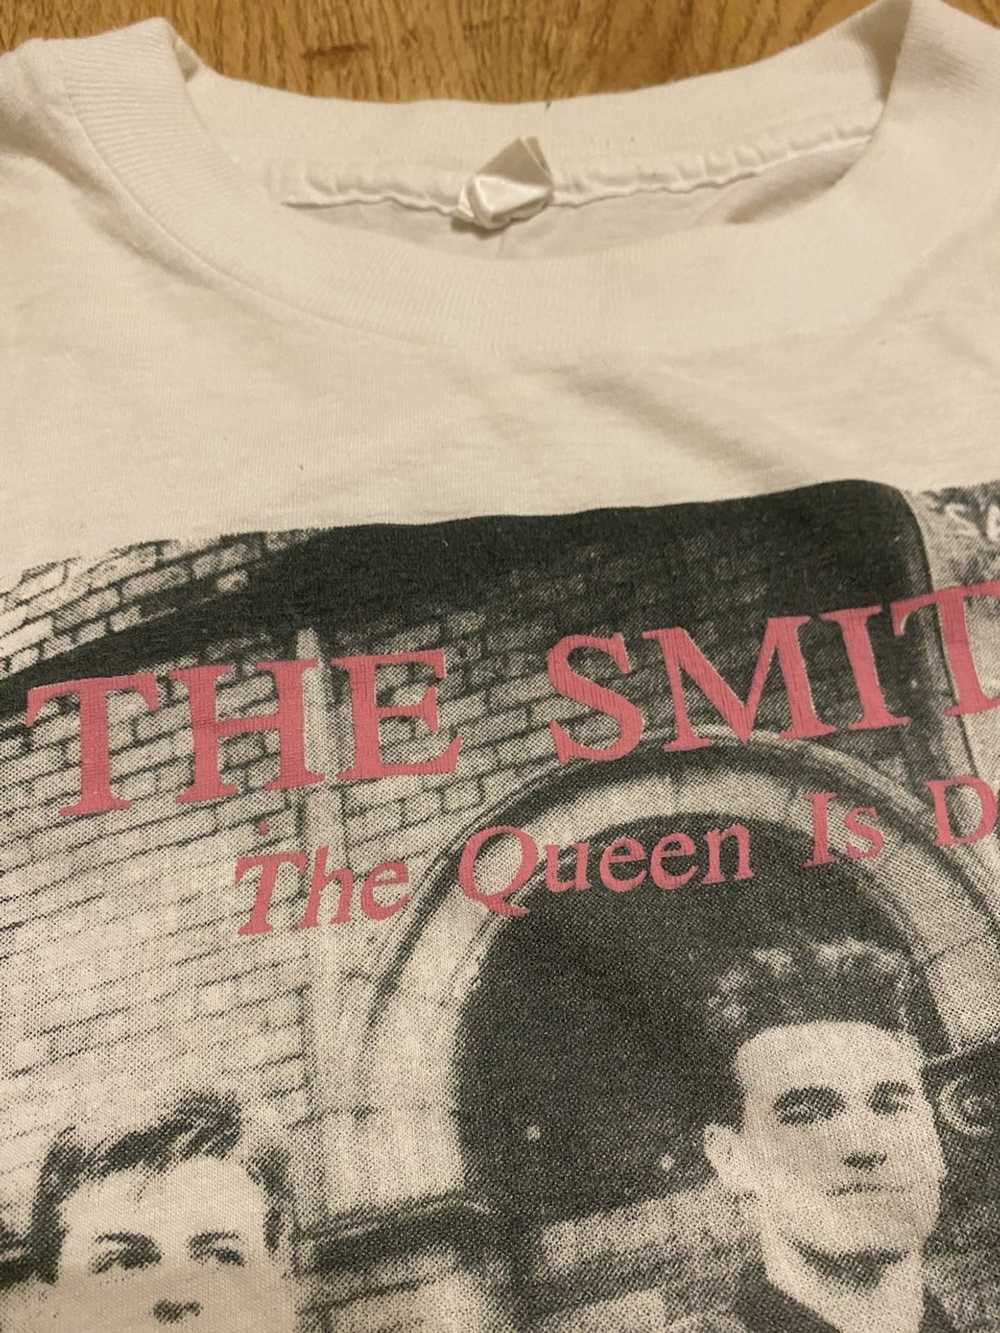 Band Tees × Rock Tees × The Smiths Vintage 80s Th… - image 3